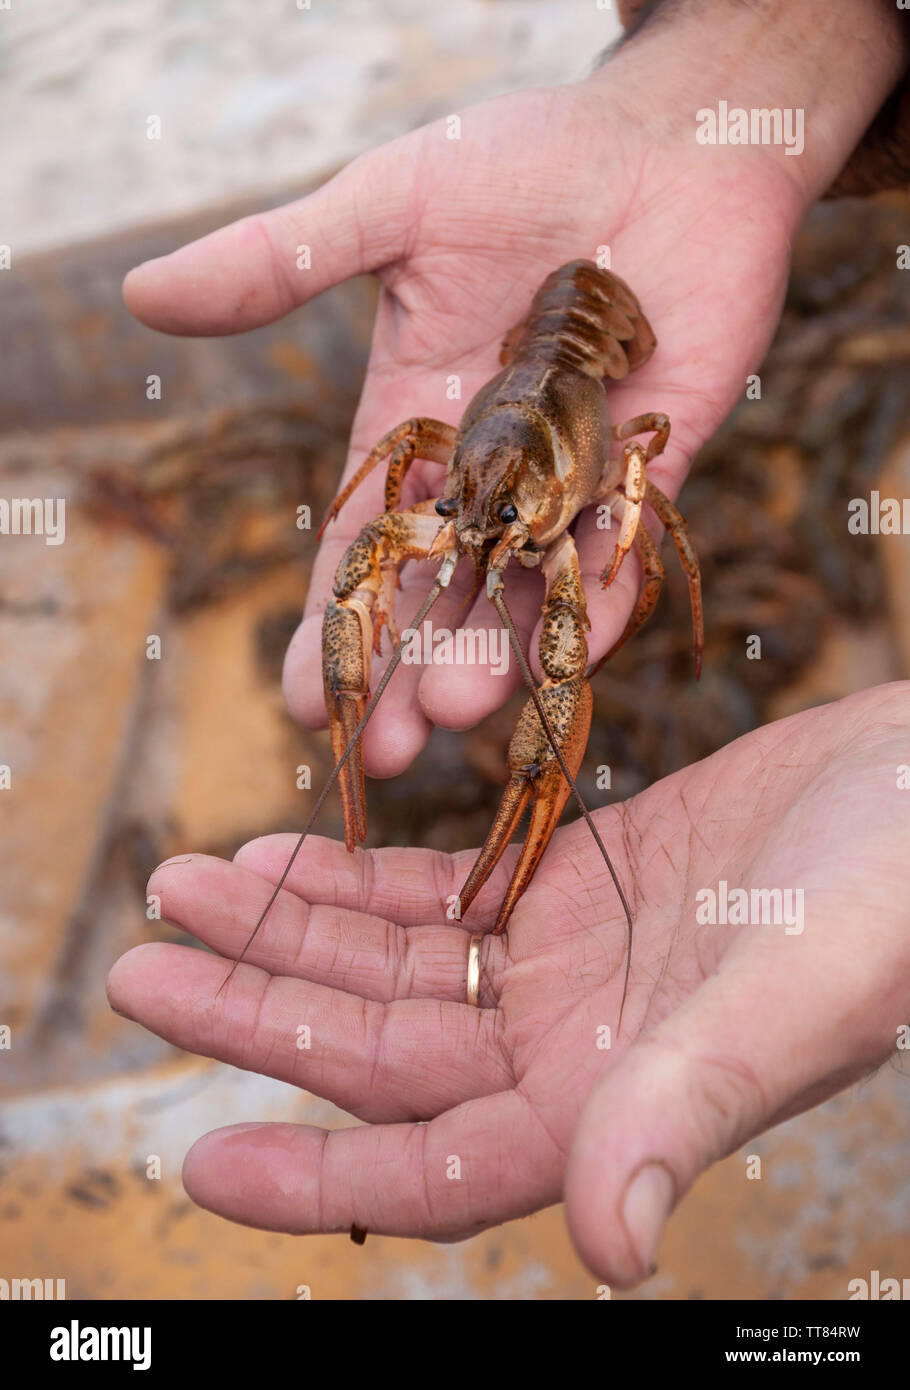 Closeup male hands holding alive freshwater crayfish on palms Stock Photo